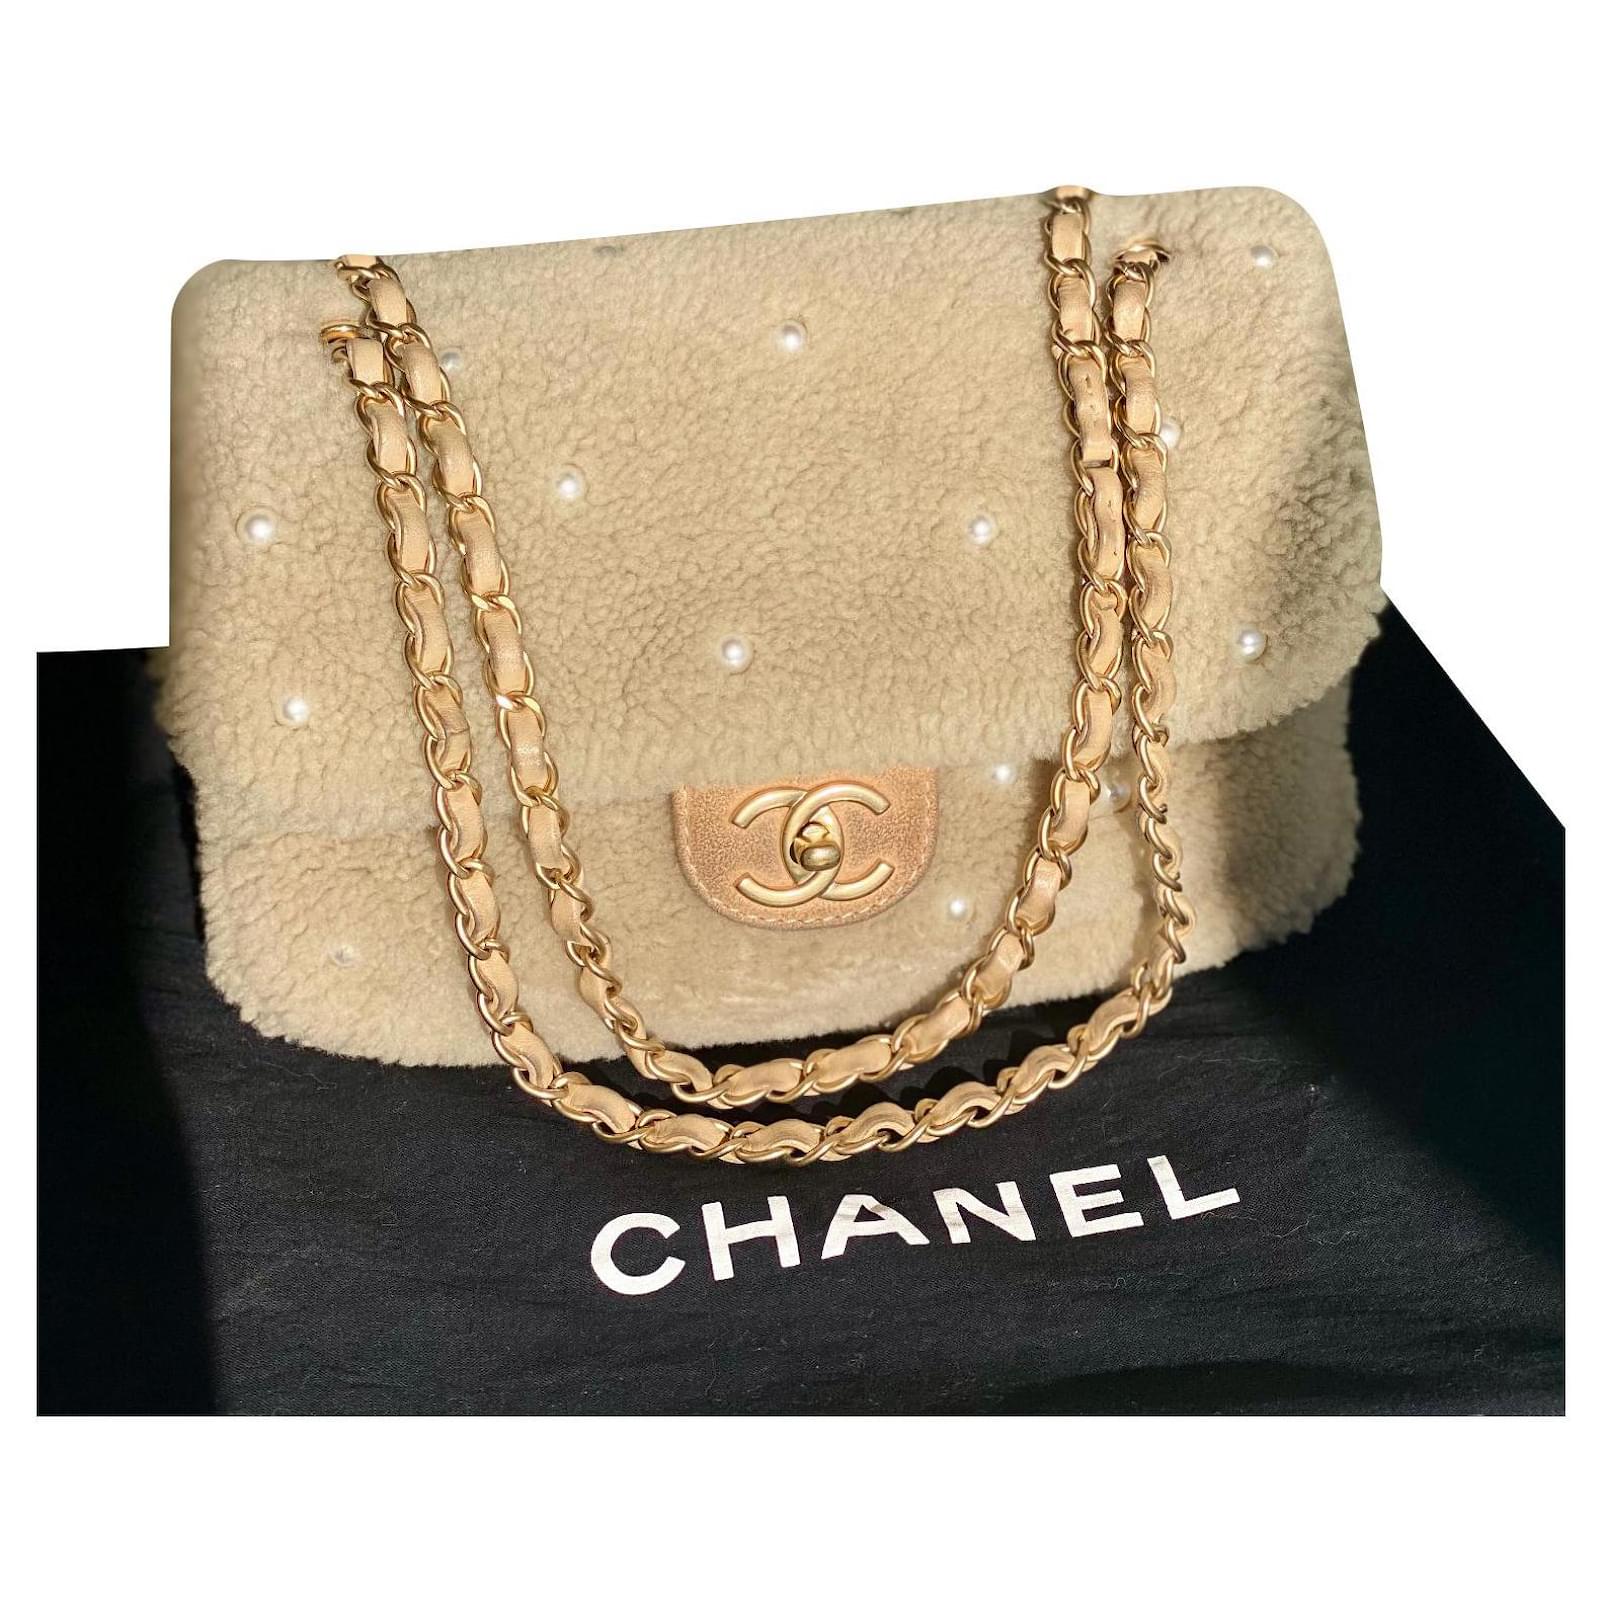 chanel bag 2014 limited edition